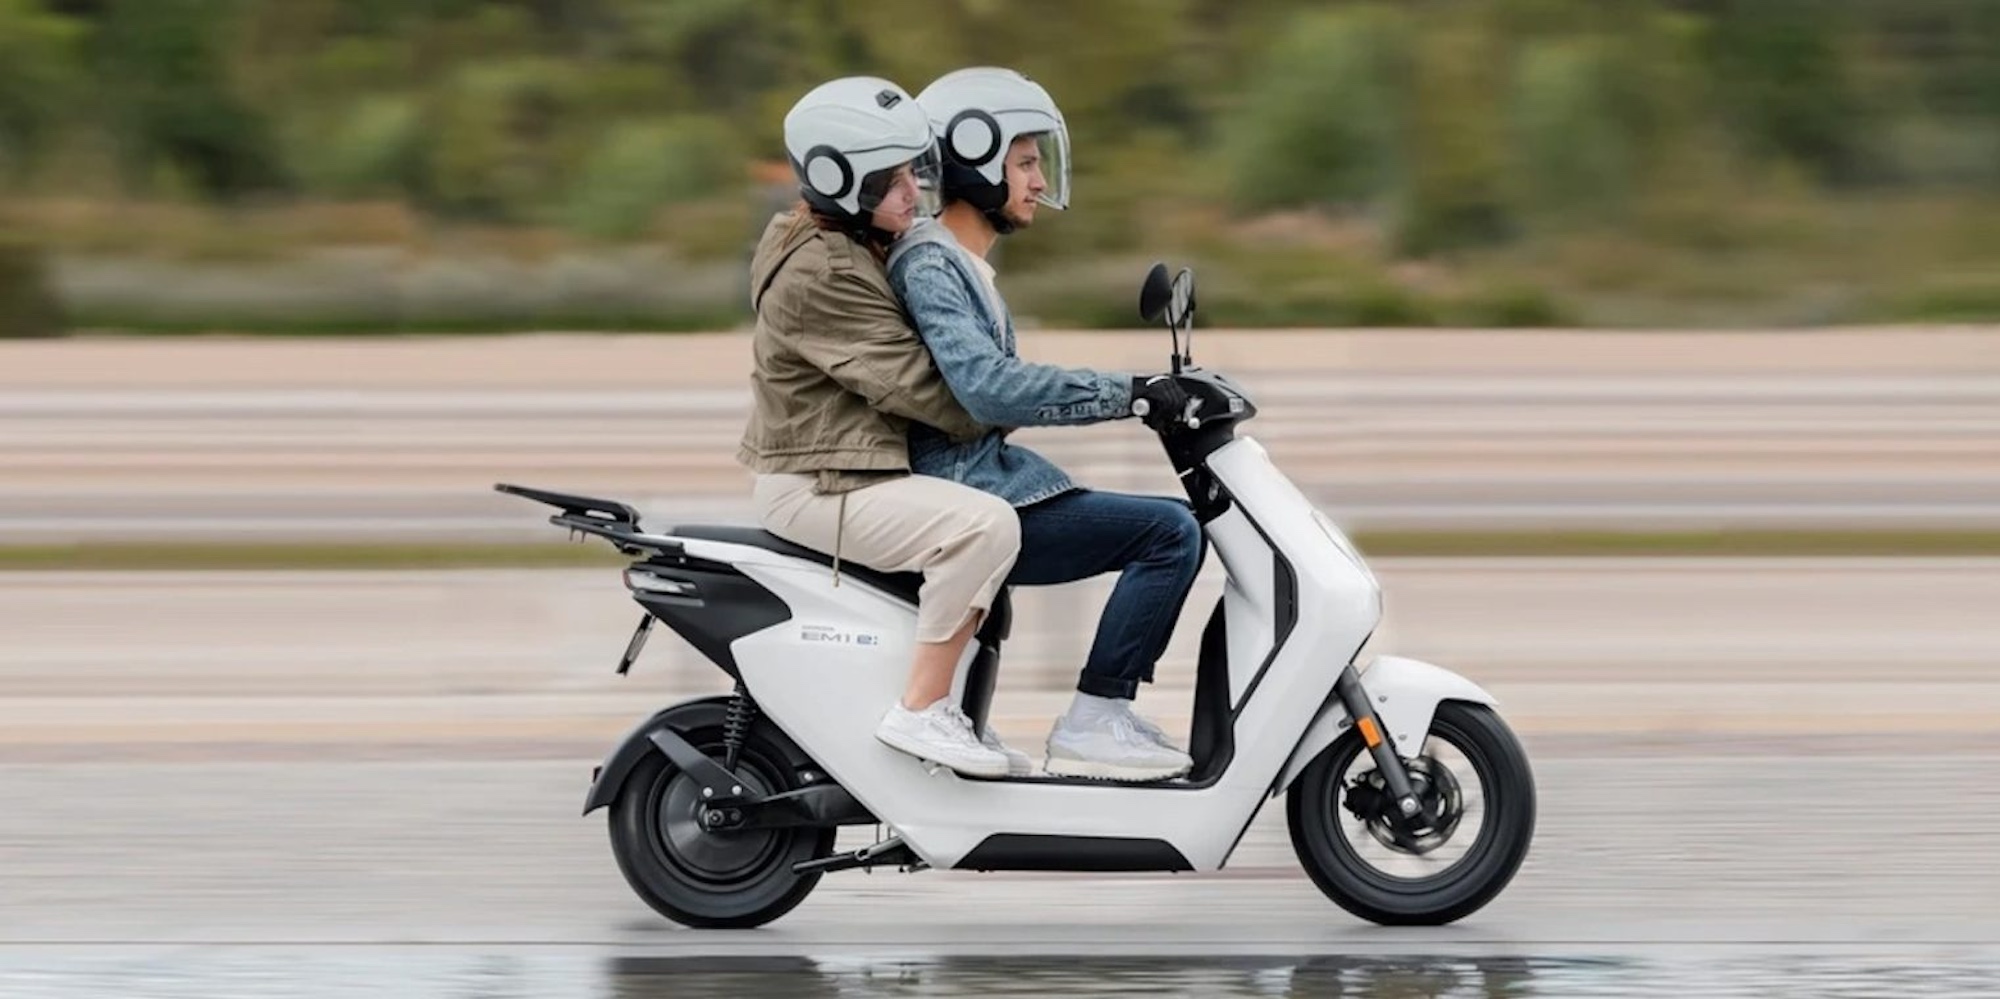 A side view of two people riding a Honda EM 1 scooter/motorcycle.